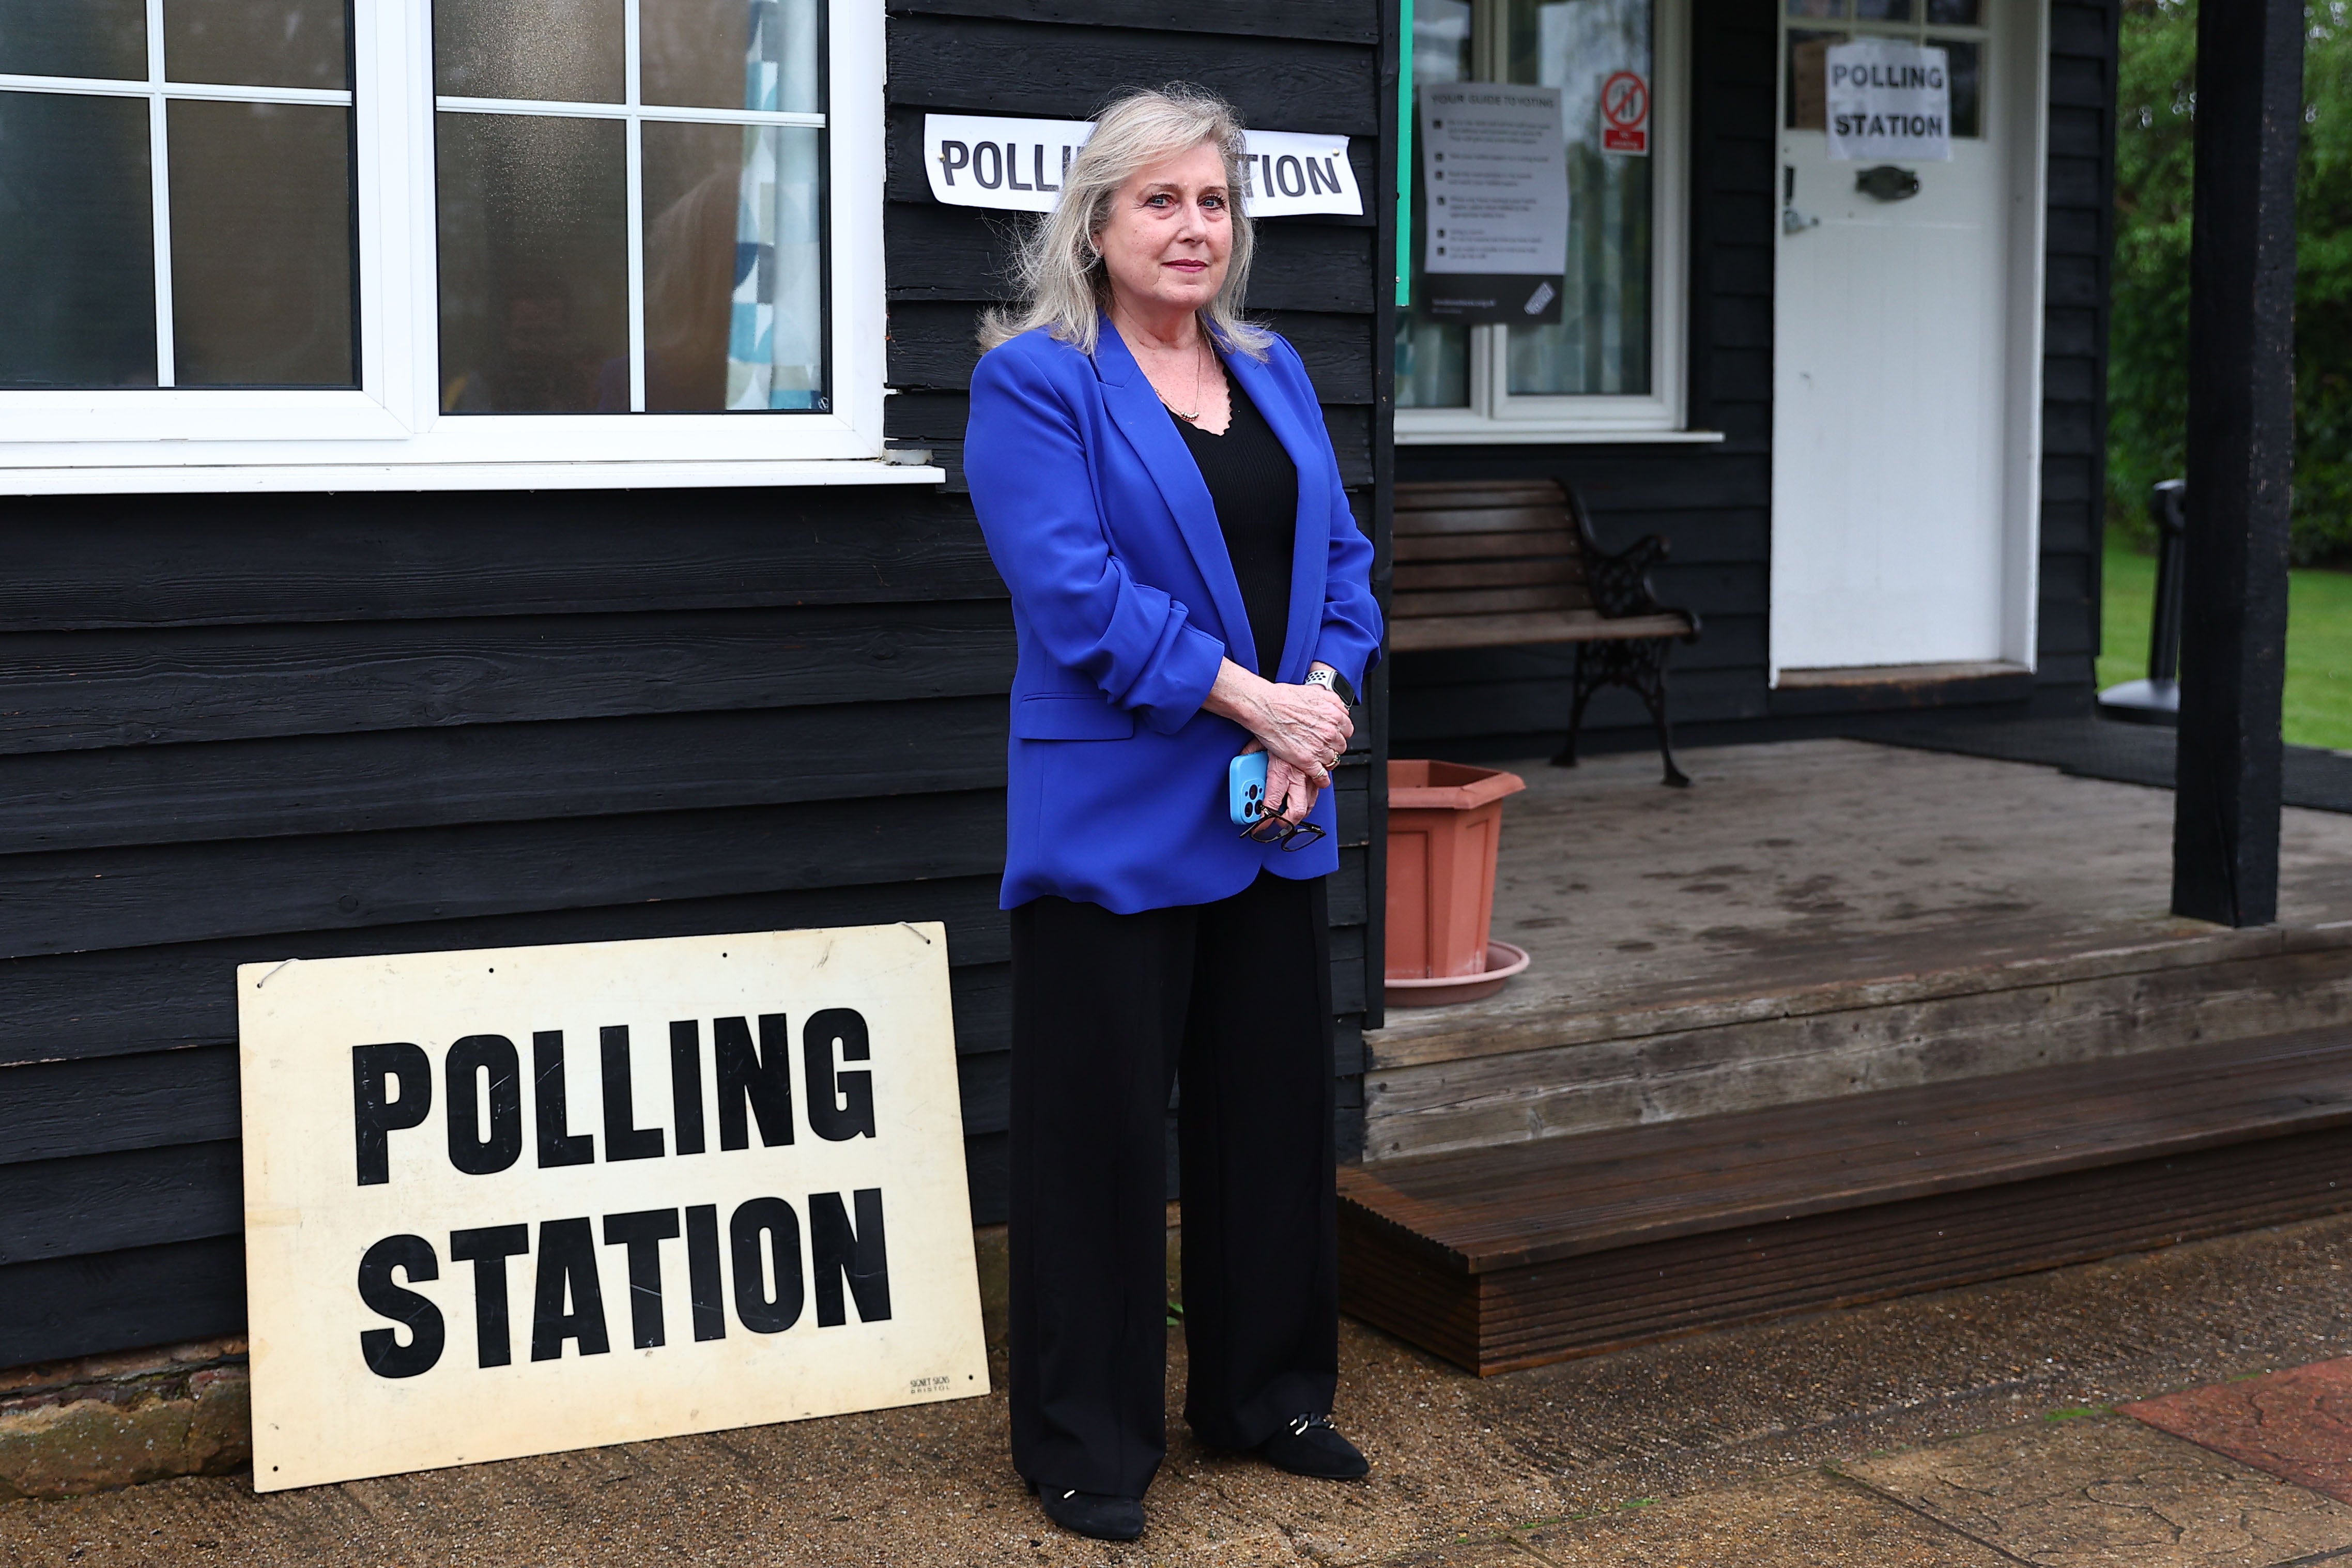 Tory Susan Hall has narrowed the gap according to one poll